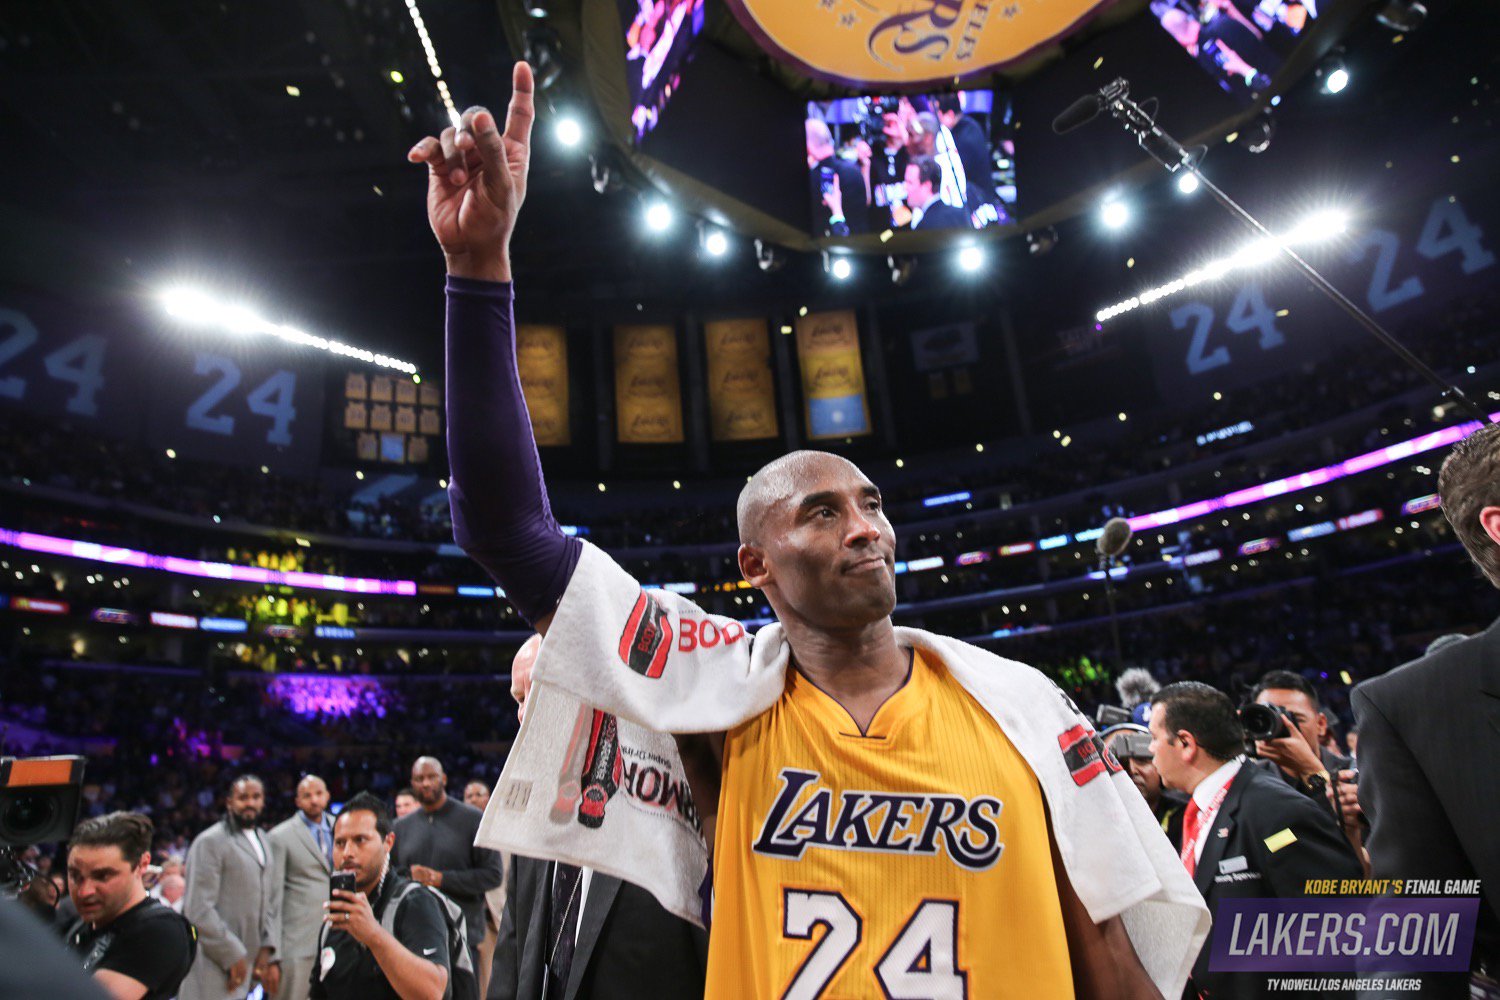 Kobe Bryant, his dad seemed to be reconciling before his death